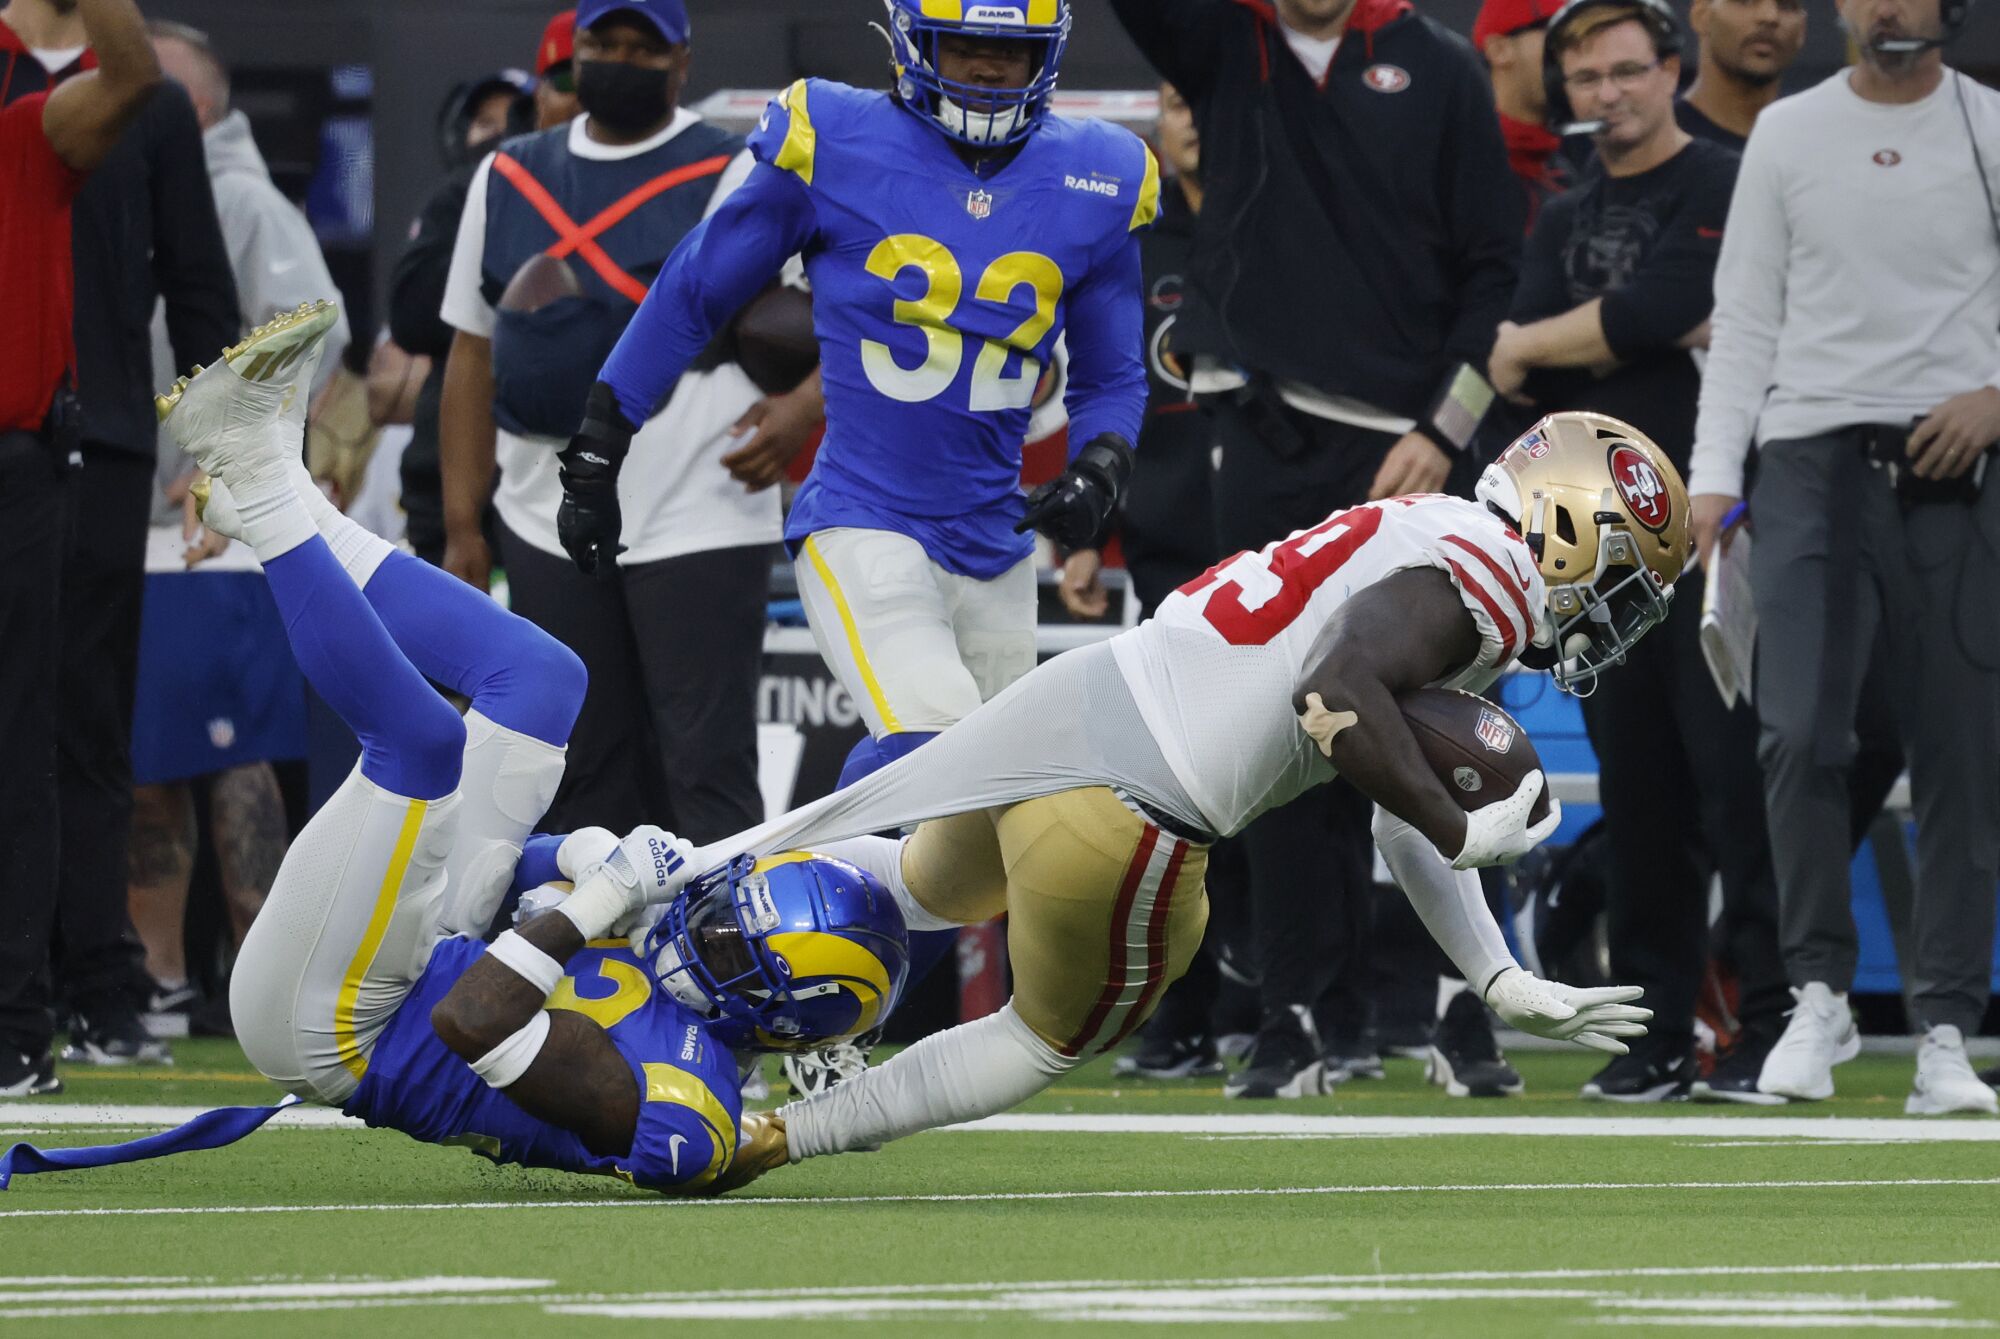 Rams safety Nick Scott tackles 49ers wide receiver Deebo Samuel by his undershirt